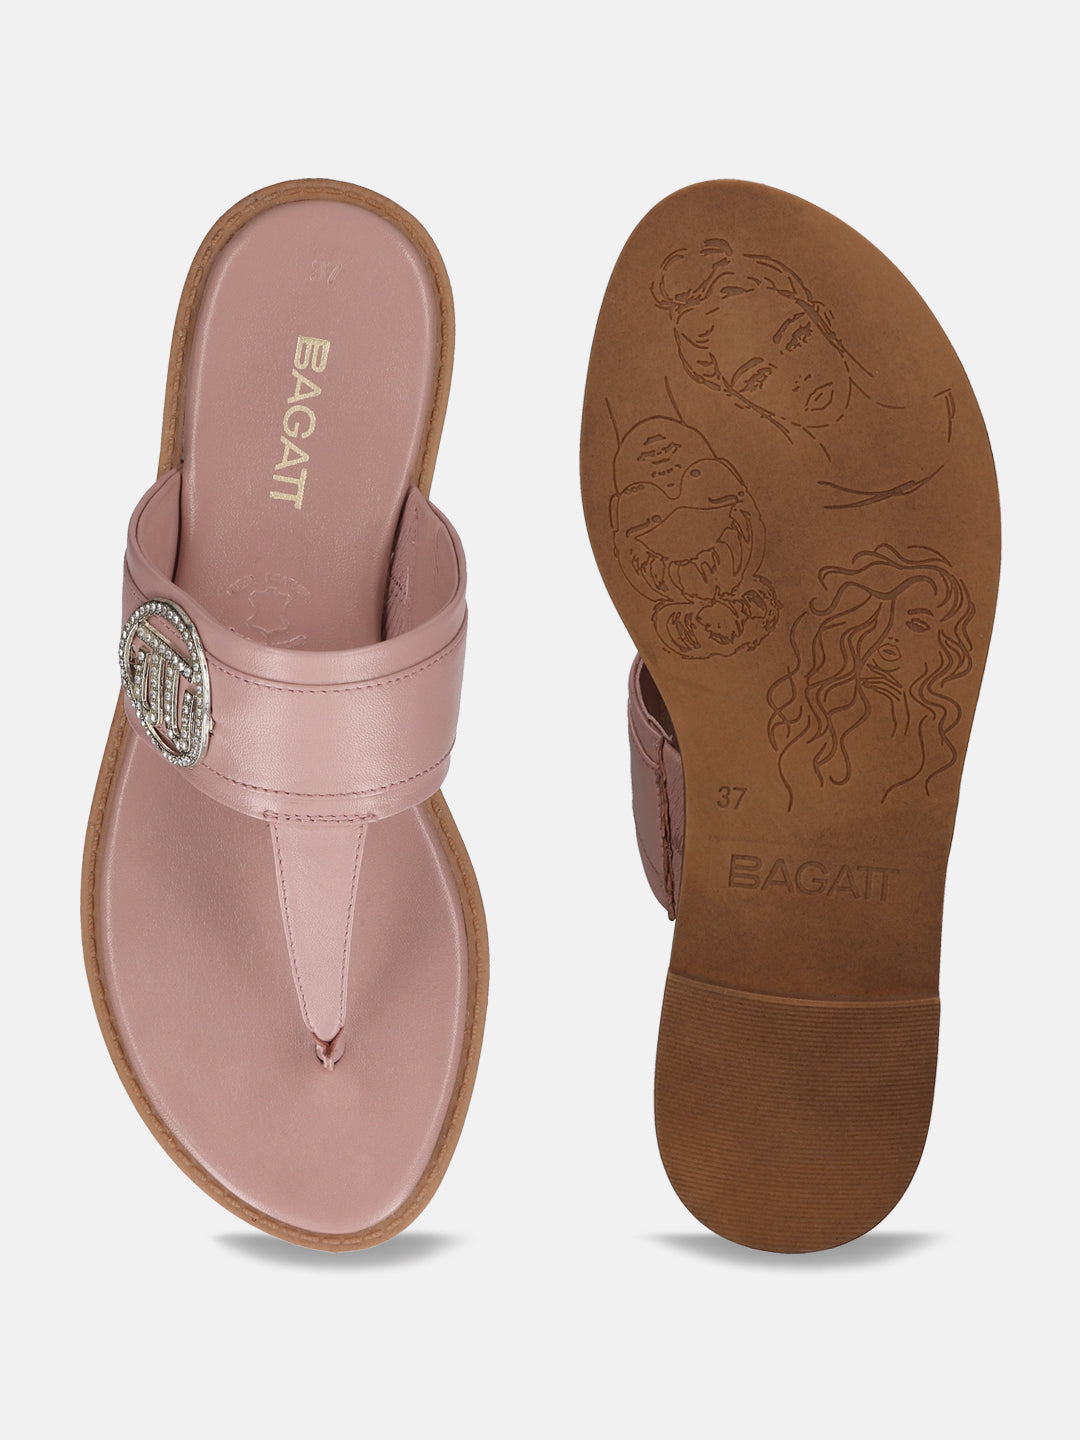 Goldy Rose Thongs Sandals